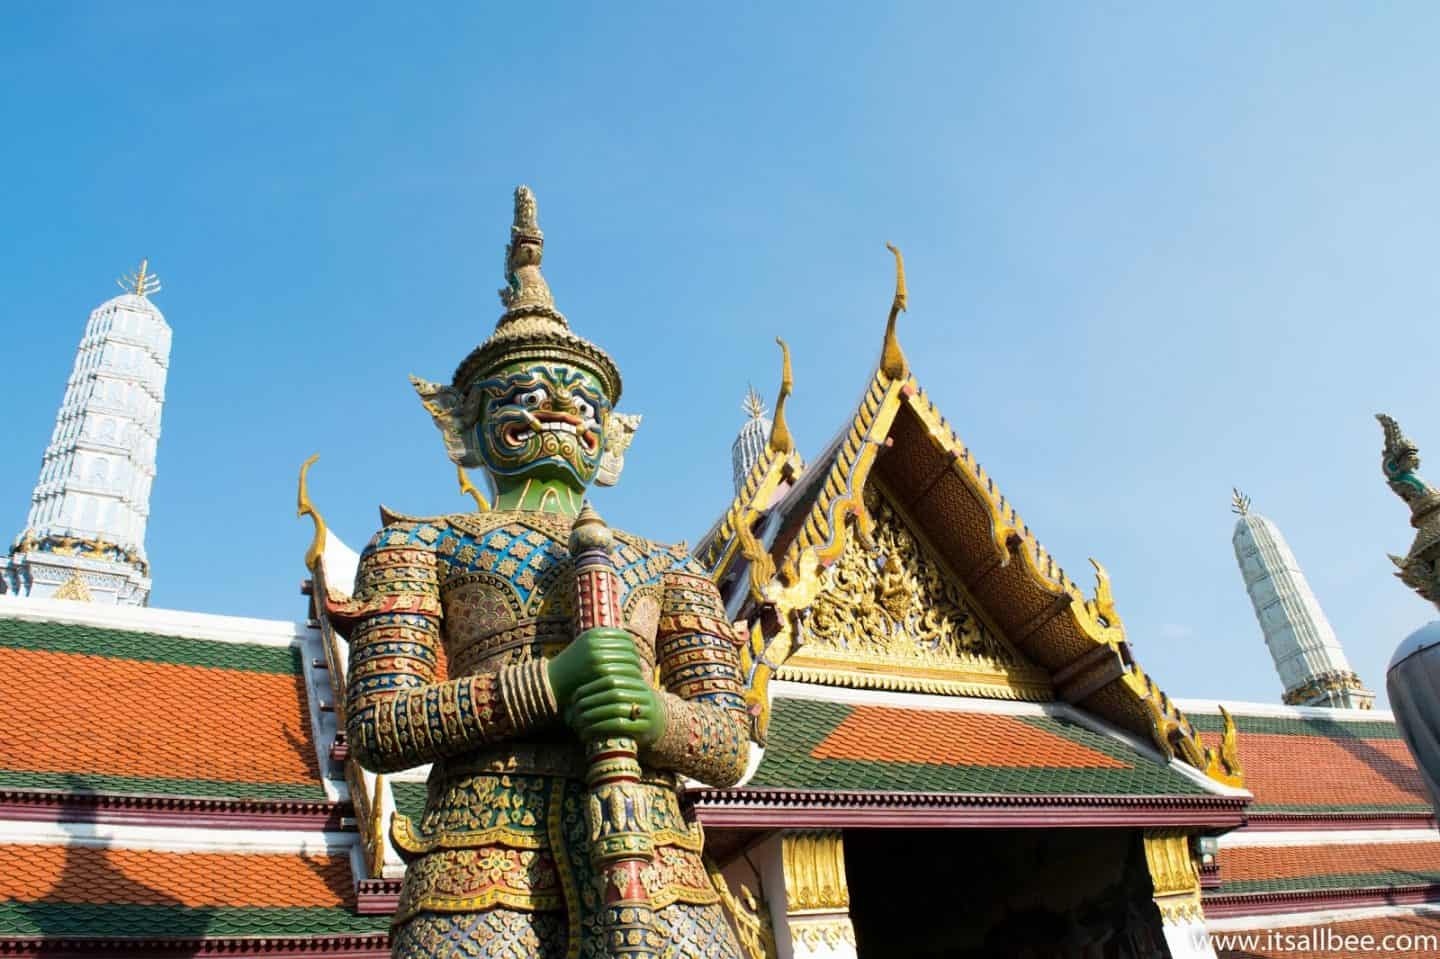 Bangkok tour guide - A guide to the best tours in Bangkok Thailand. From day trips from Bangkok to floating markets, temples and more. Bangkok Tourist attractions, the Bangkok tourist places to visit. Wat Arun, Grand Palace, best markets in Bangkok and more places to visit in Bangkok. #thailand #southeastasia #asia #adventure #bkk #foodie #thaifood